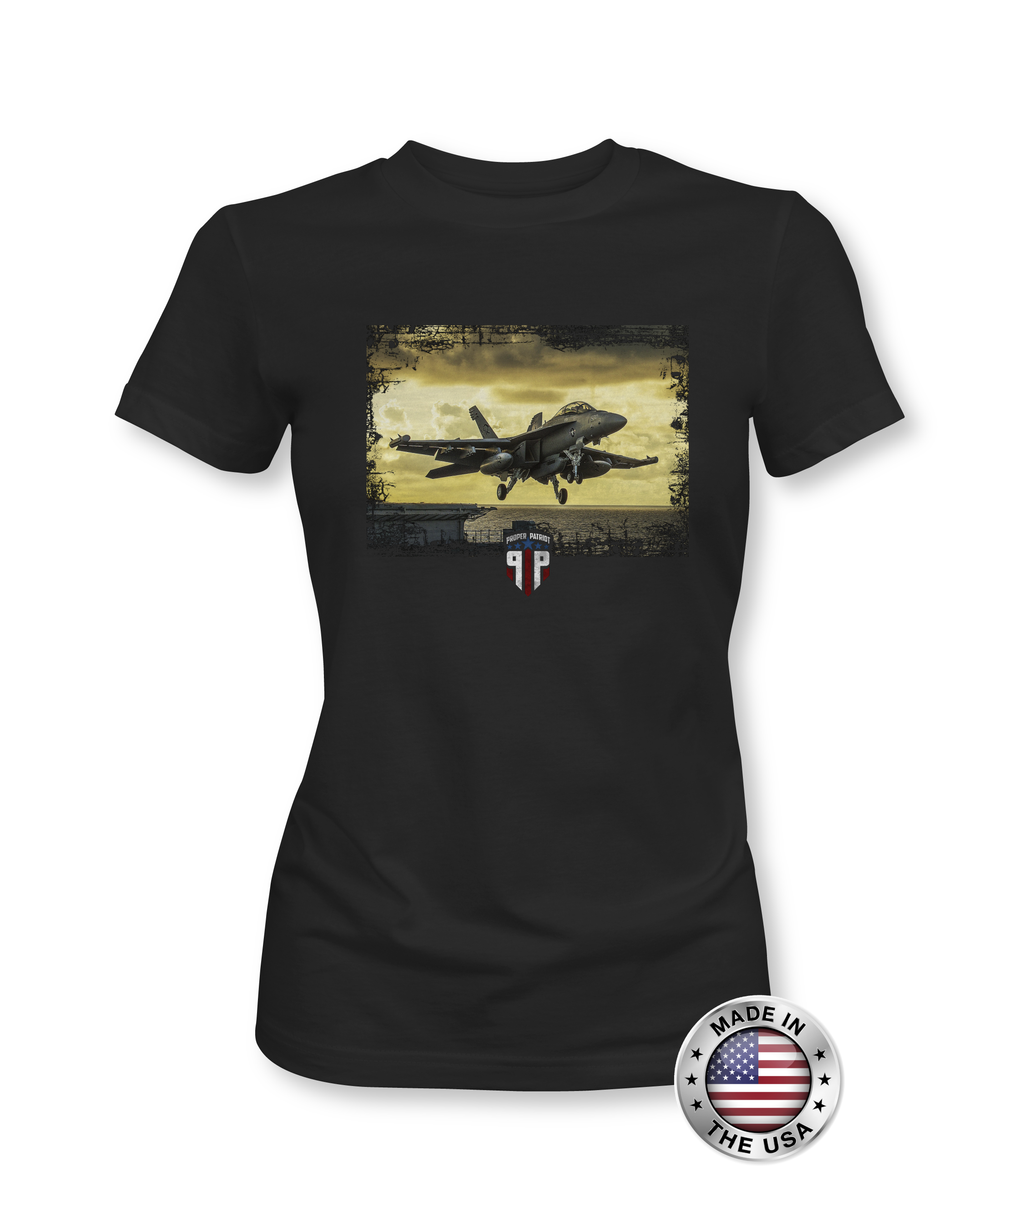 Sunset Takeoff Over Water - Military Gear - Women's Patriotic Shirts - Proper Patriot